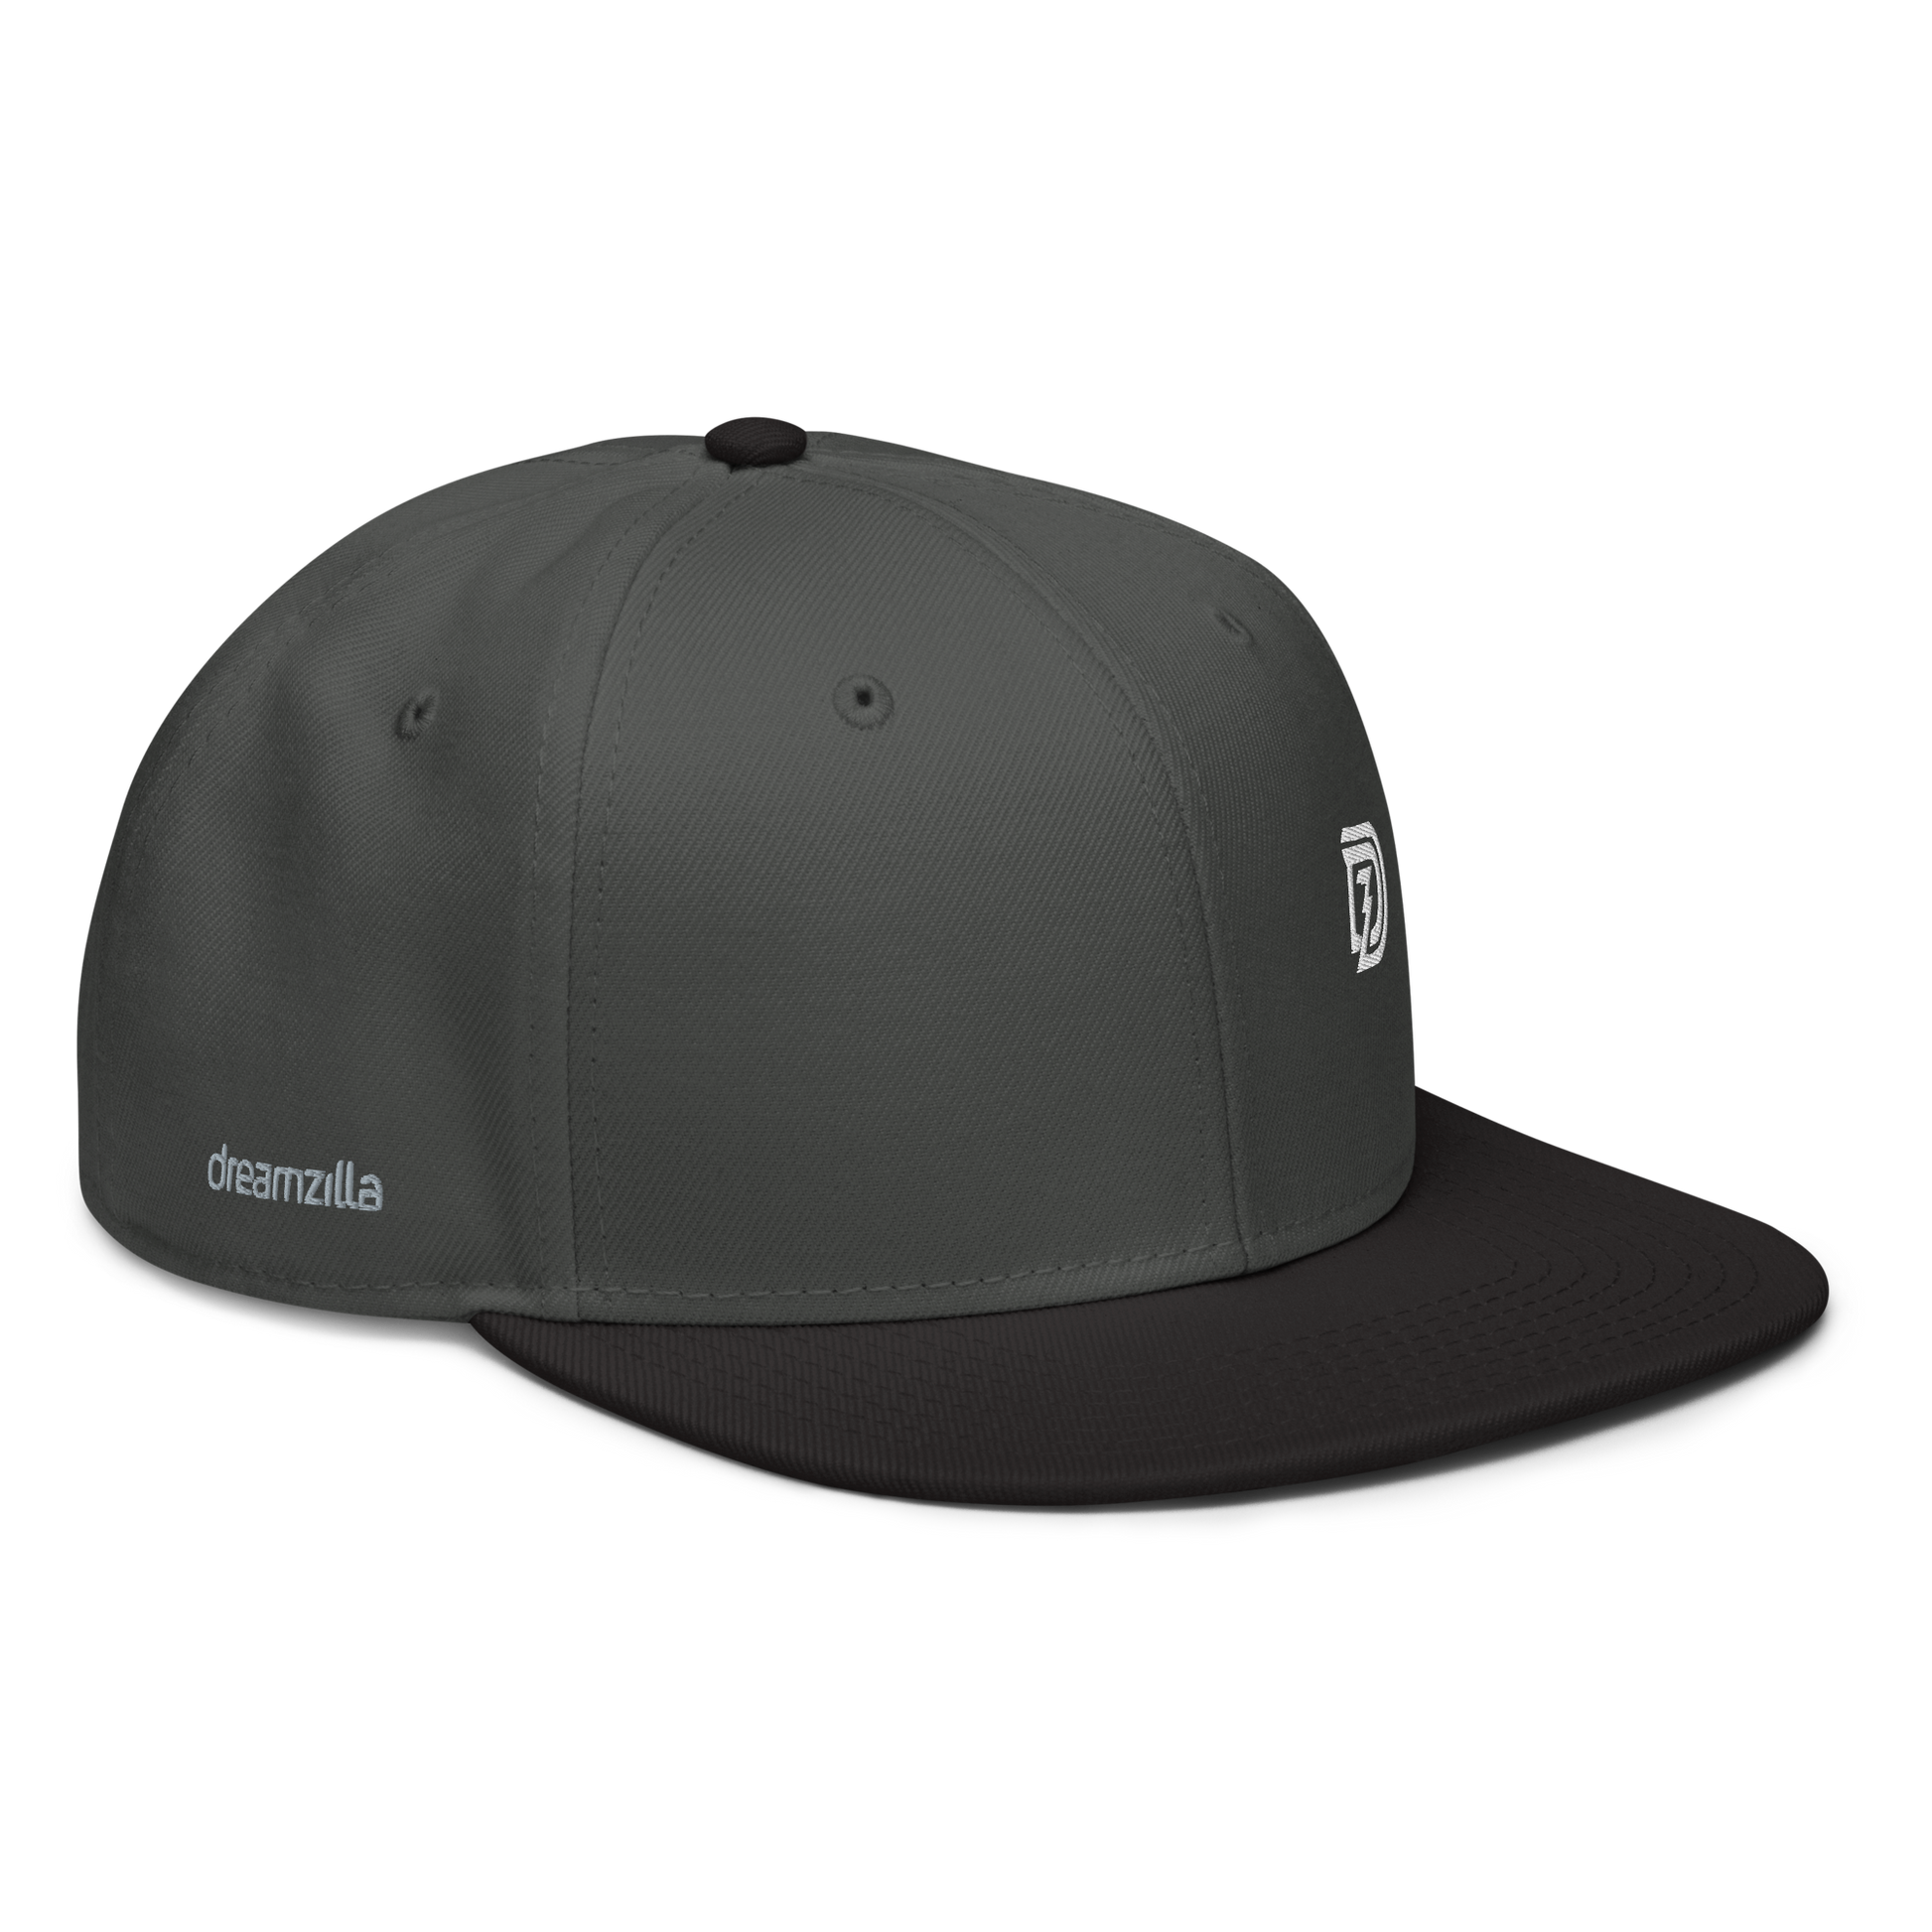 Angled View of DZ Monochrome Snapback in Charcoal Gray with Black Brim